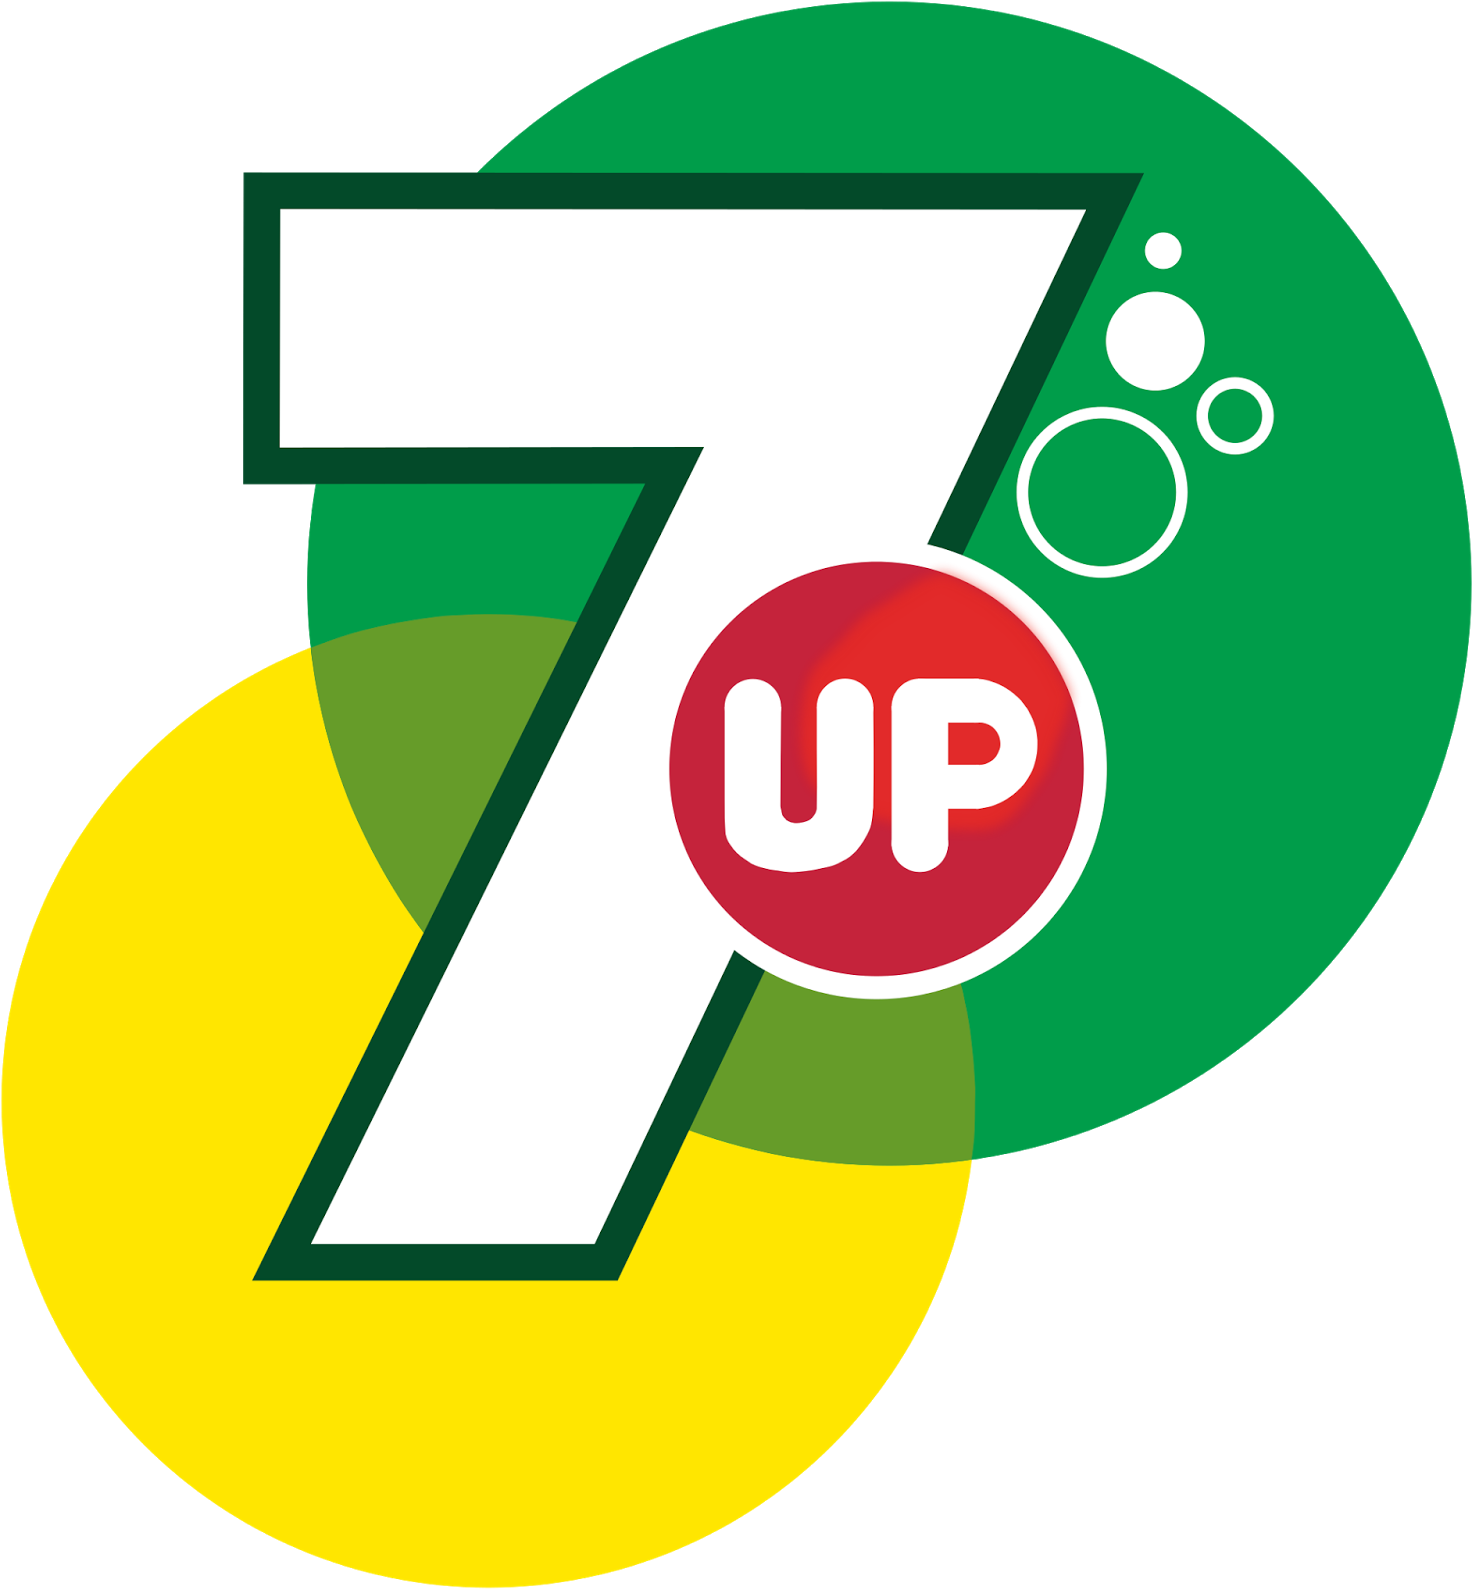 7 Up - Seven Up Logo Png (1486x1600)